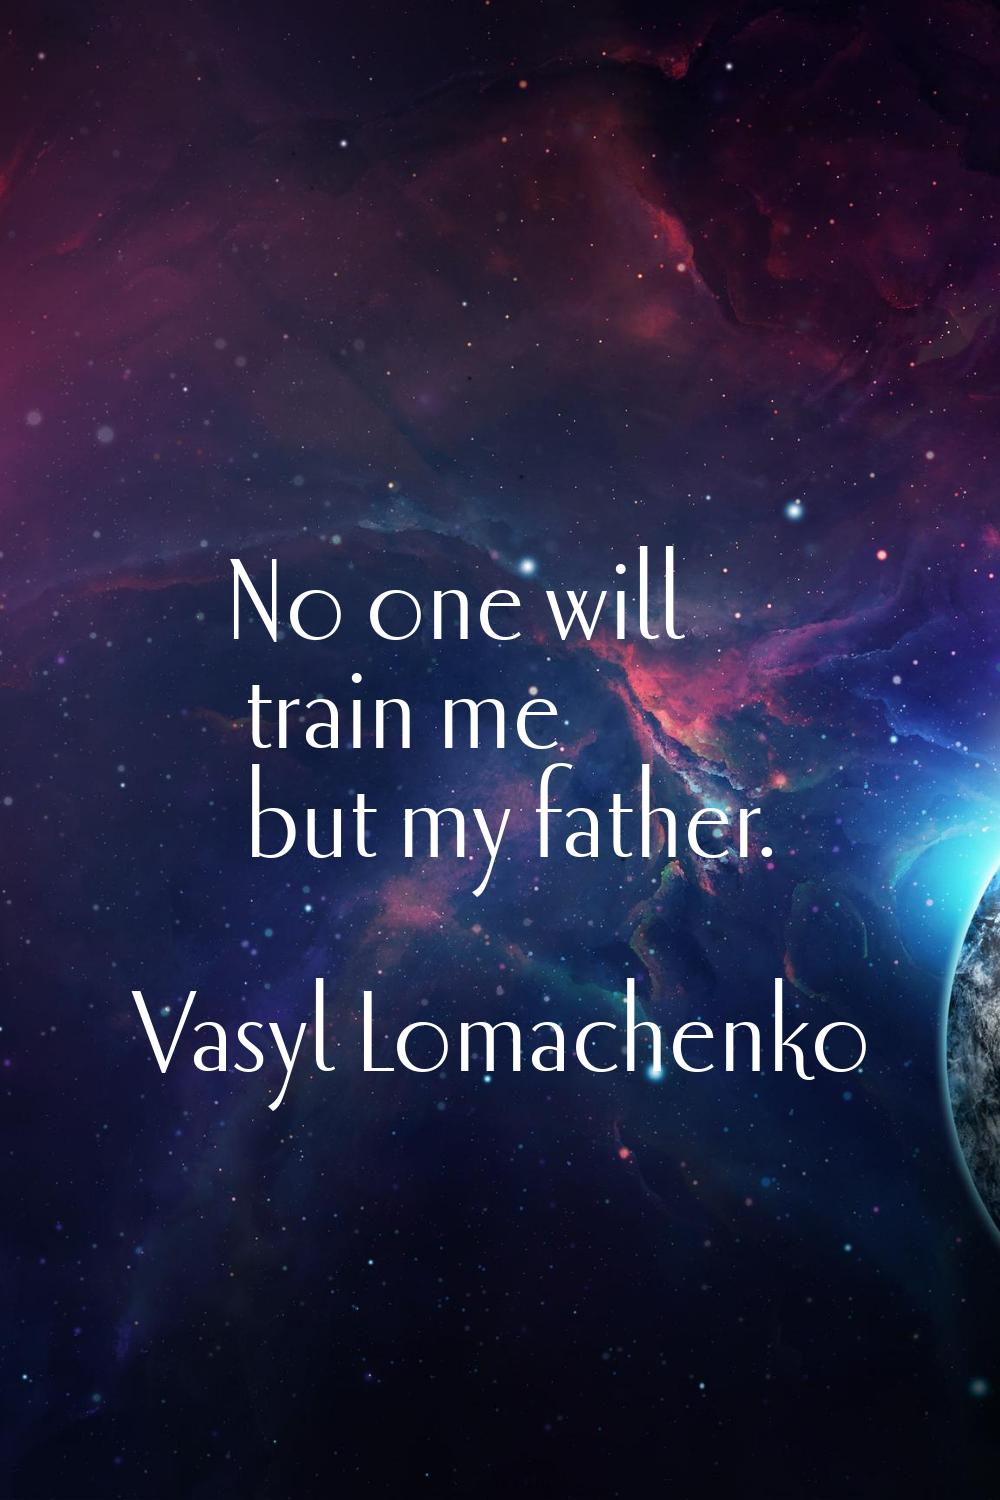 No one will train me but my father.